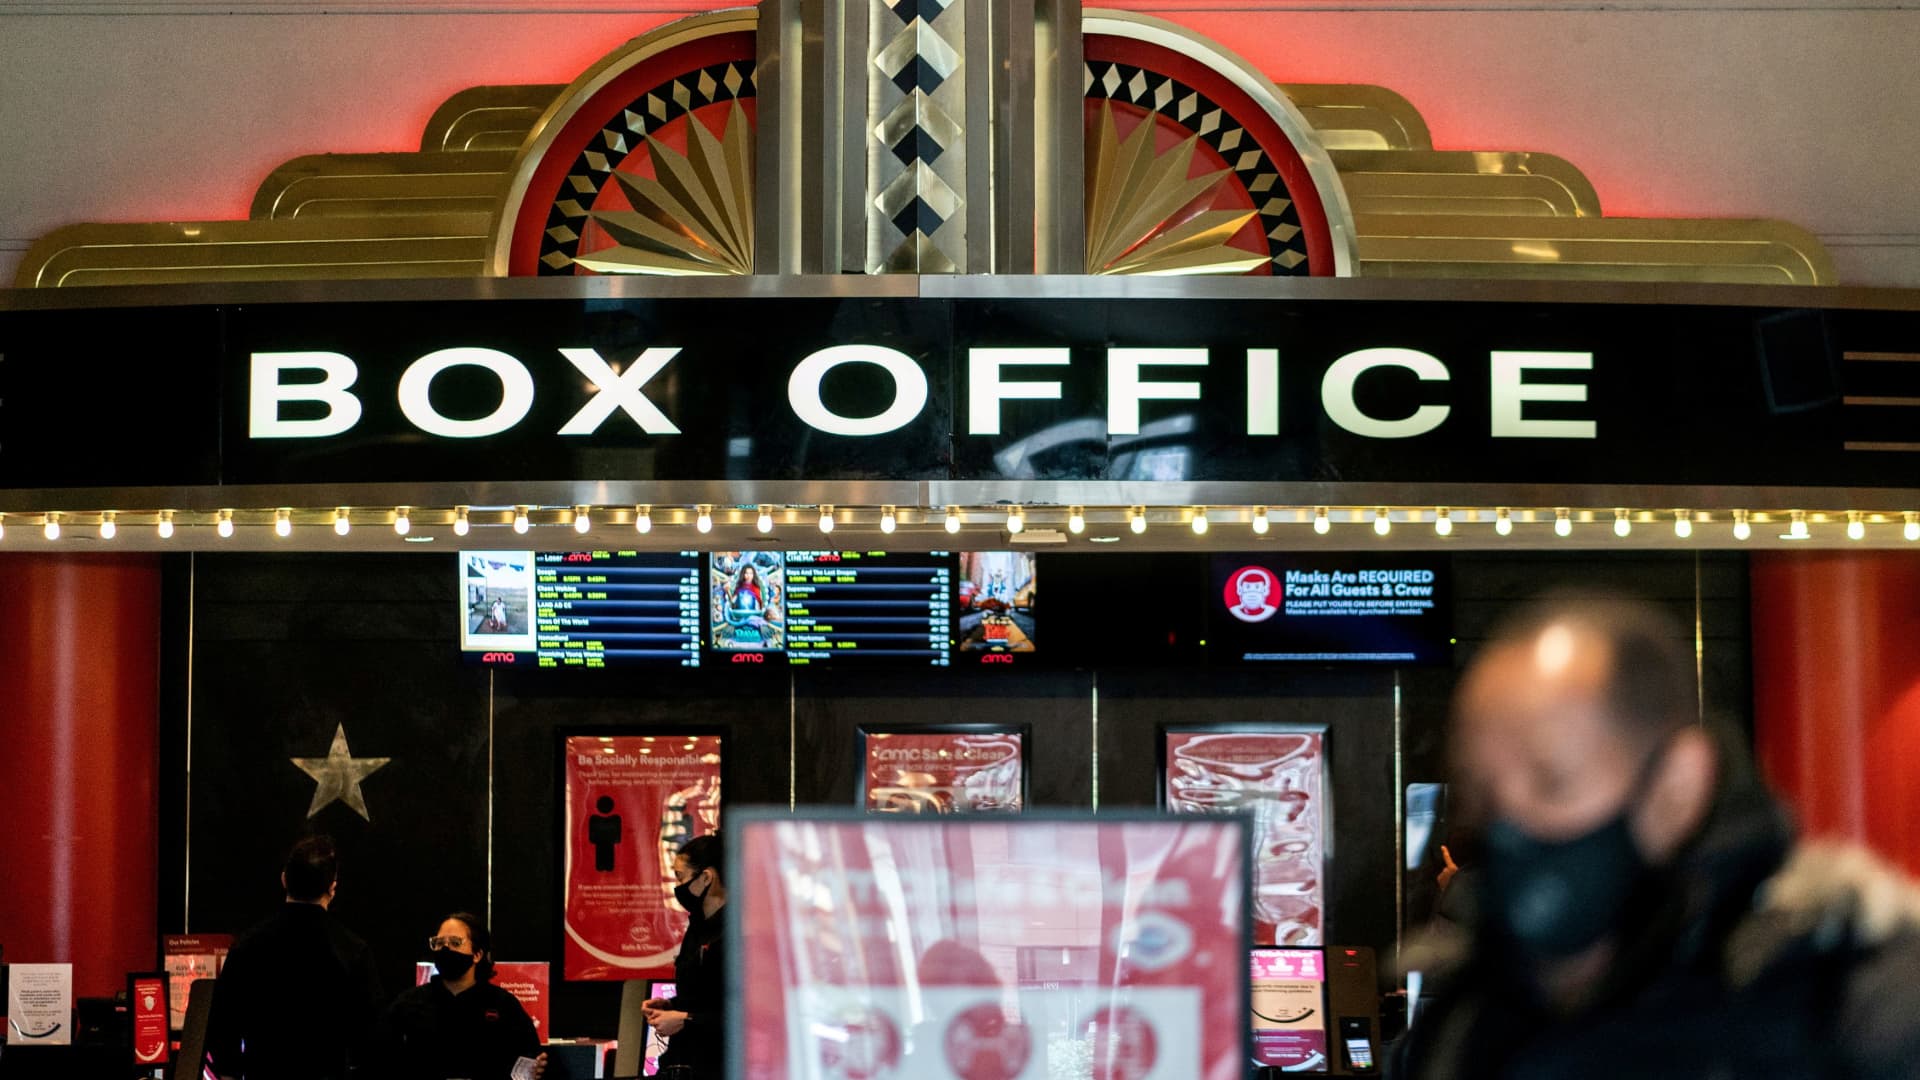 Amazon to spend $1 billion on theatrical releases, boosting cinema stocks